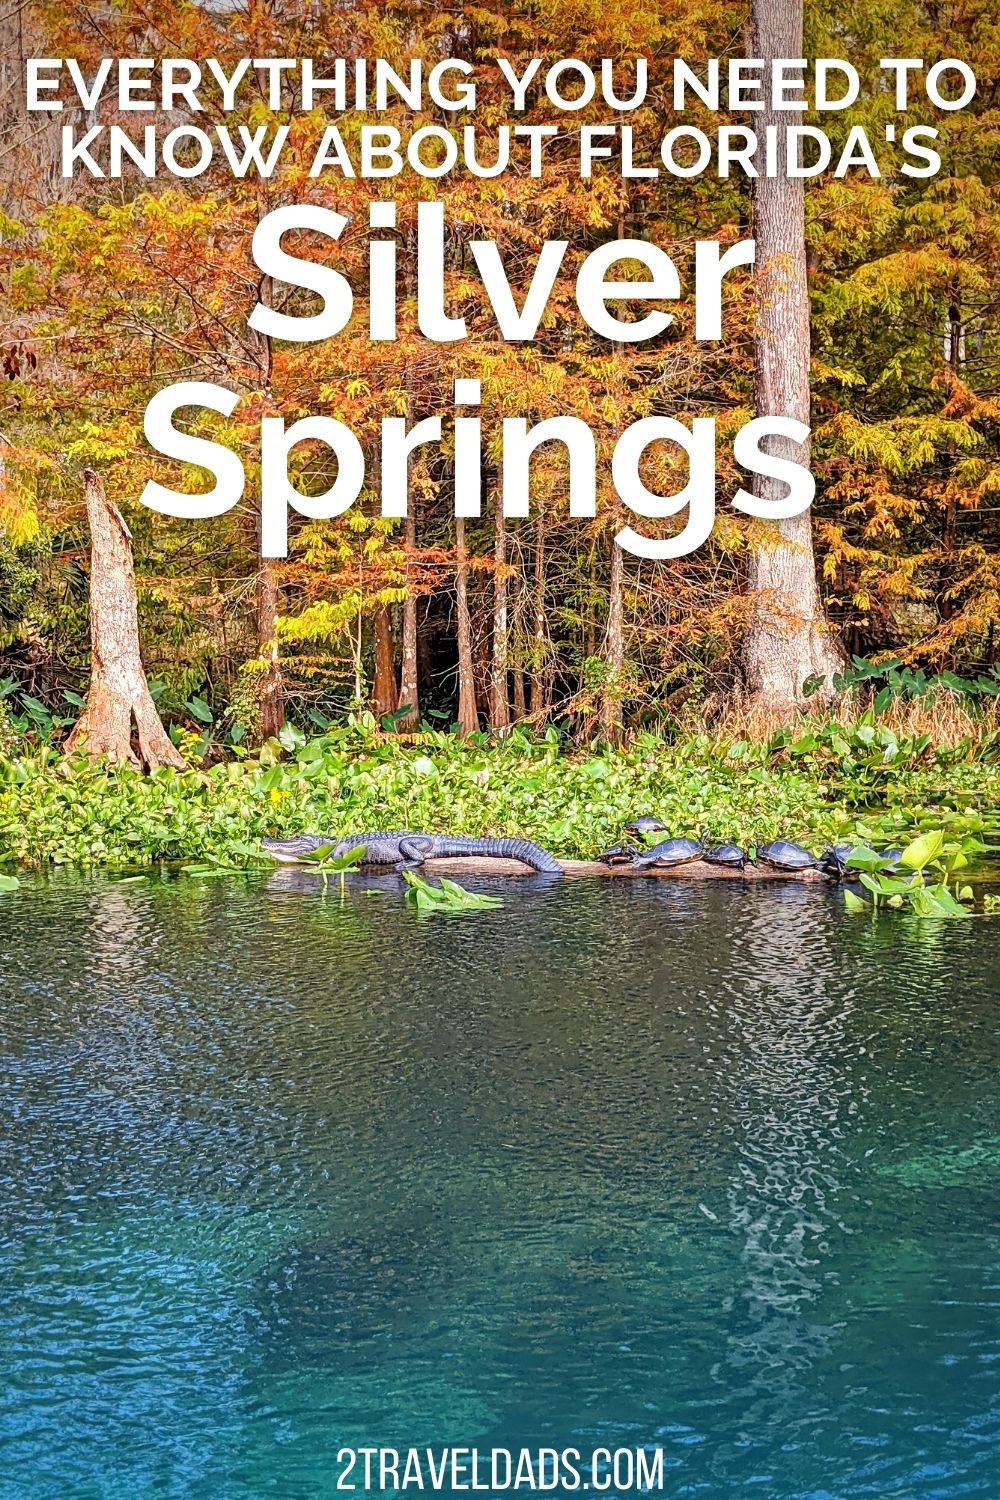 Silver Springs State Park is one of the prettiest places in Florida, and perhaps the best state park. Guide to manatees, kayaking, trails, glass bottom boats and visiting Silver Springs.